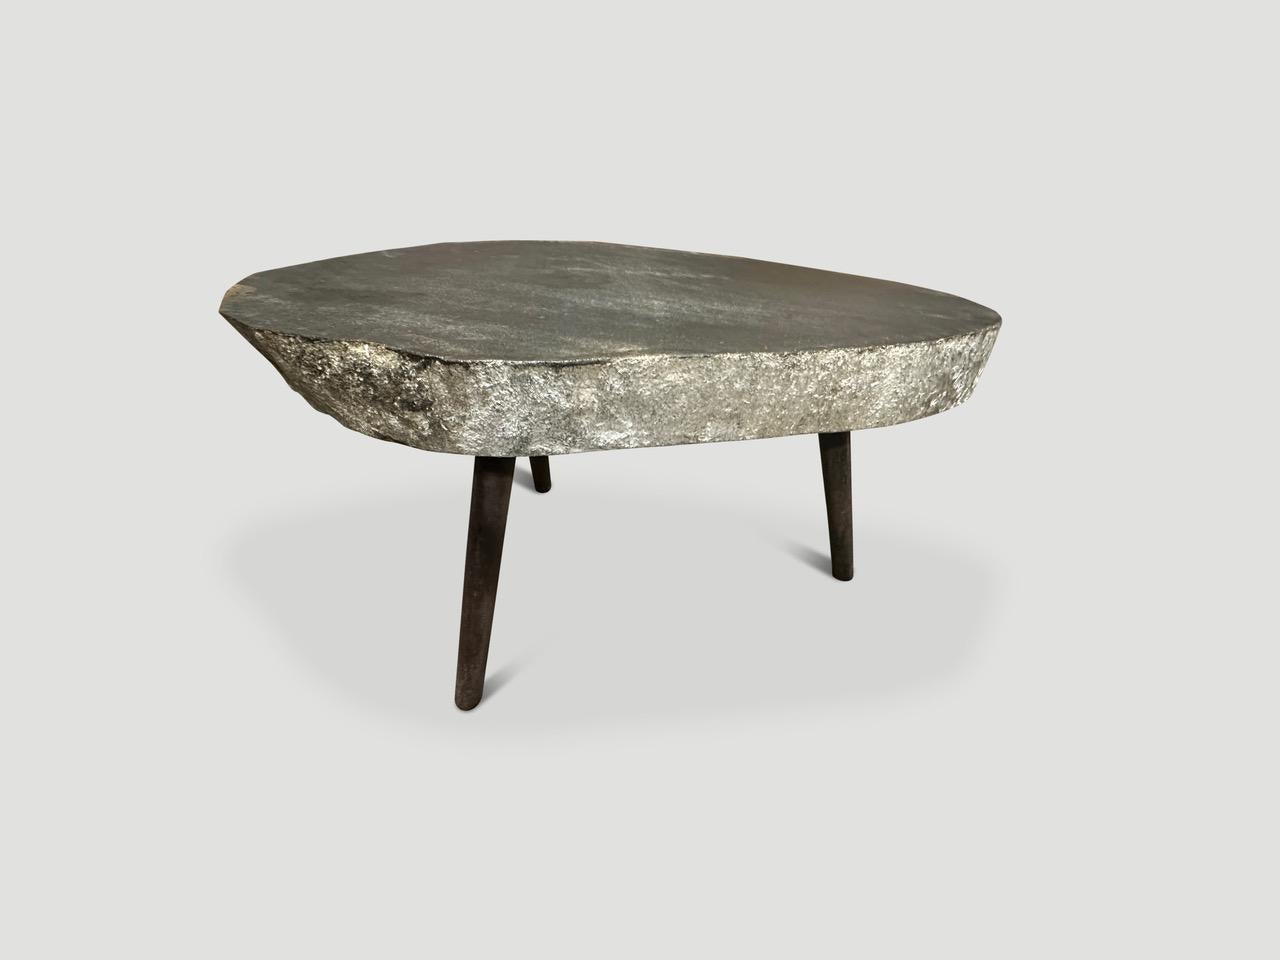 River stone side table from the Ayung River on the island of Bali. We added three charred metal legs and polished the top. The sides are left unpolished in contrast. Perfect for poolside.

Own an Andrianna Shamaris original.

Andrianna Shamaris. The